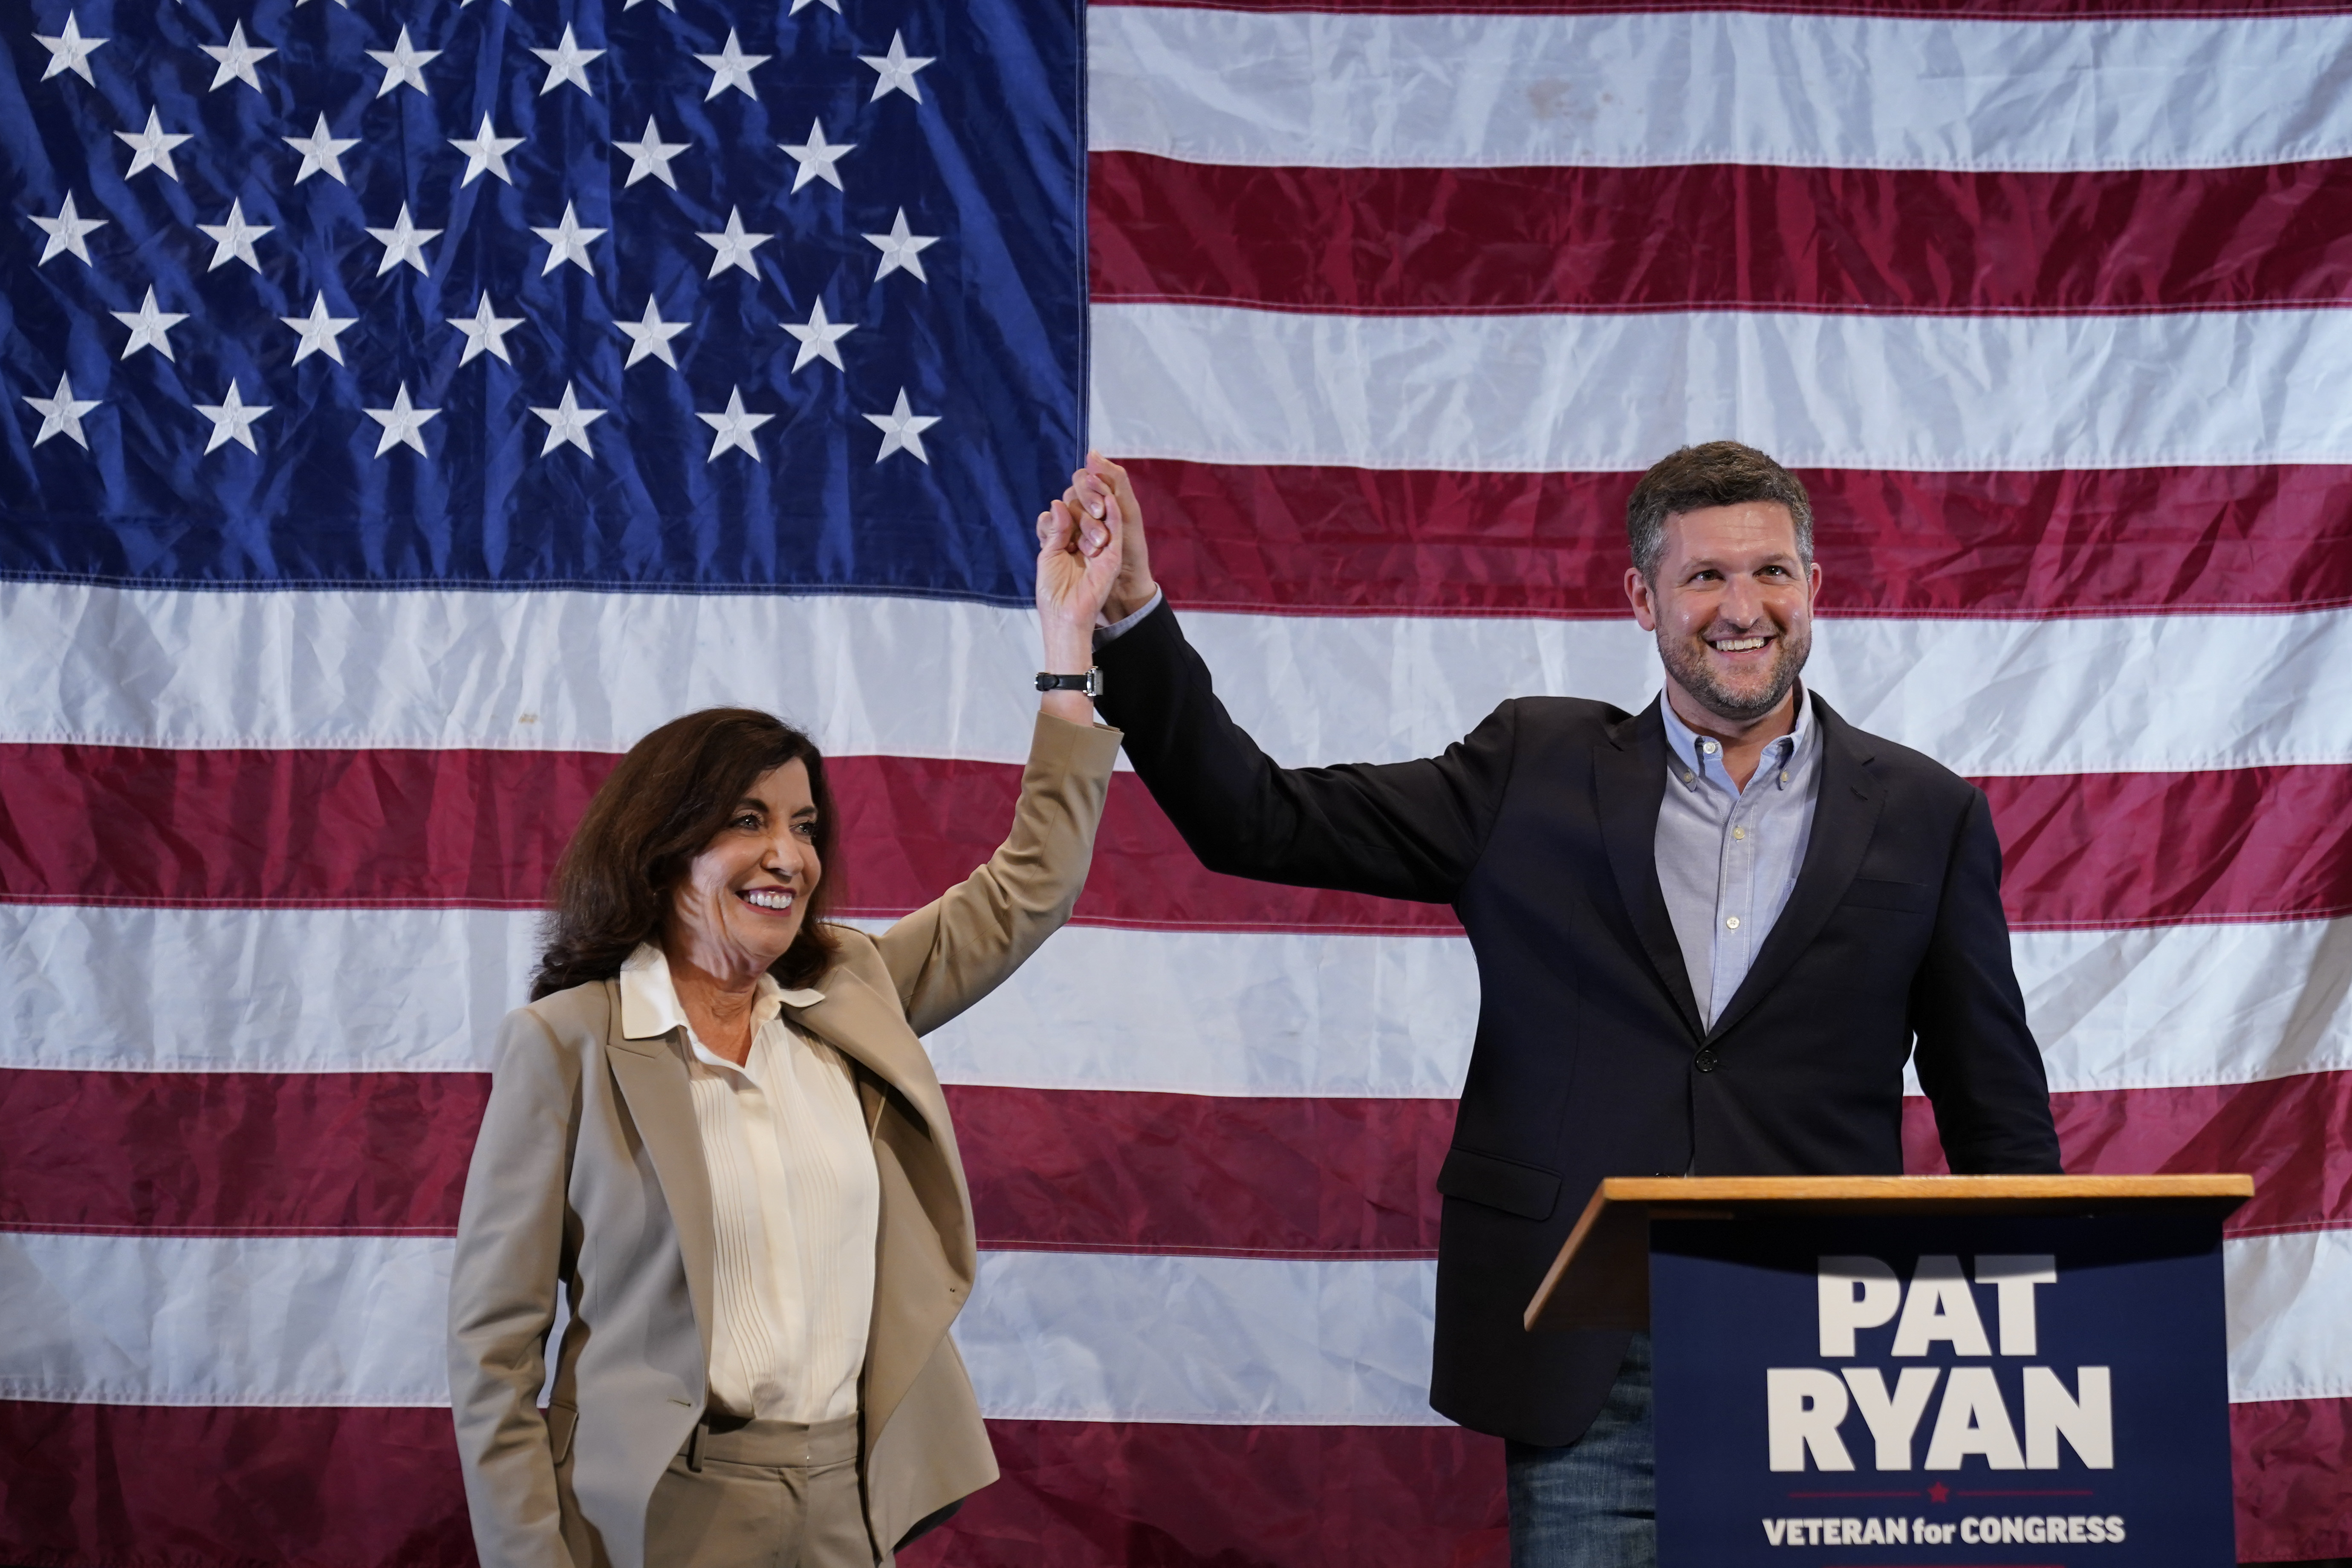 Democratic candidate Pat Ryan and New York Gov. Kathy Hochul appear on stage together during a campaign rally for Ryan.